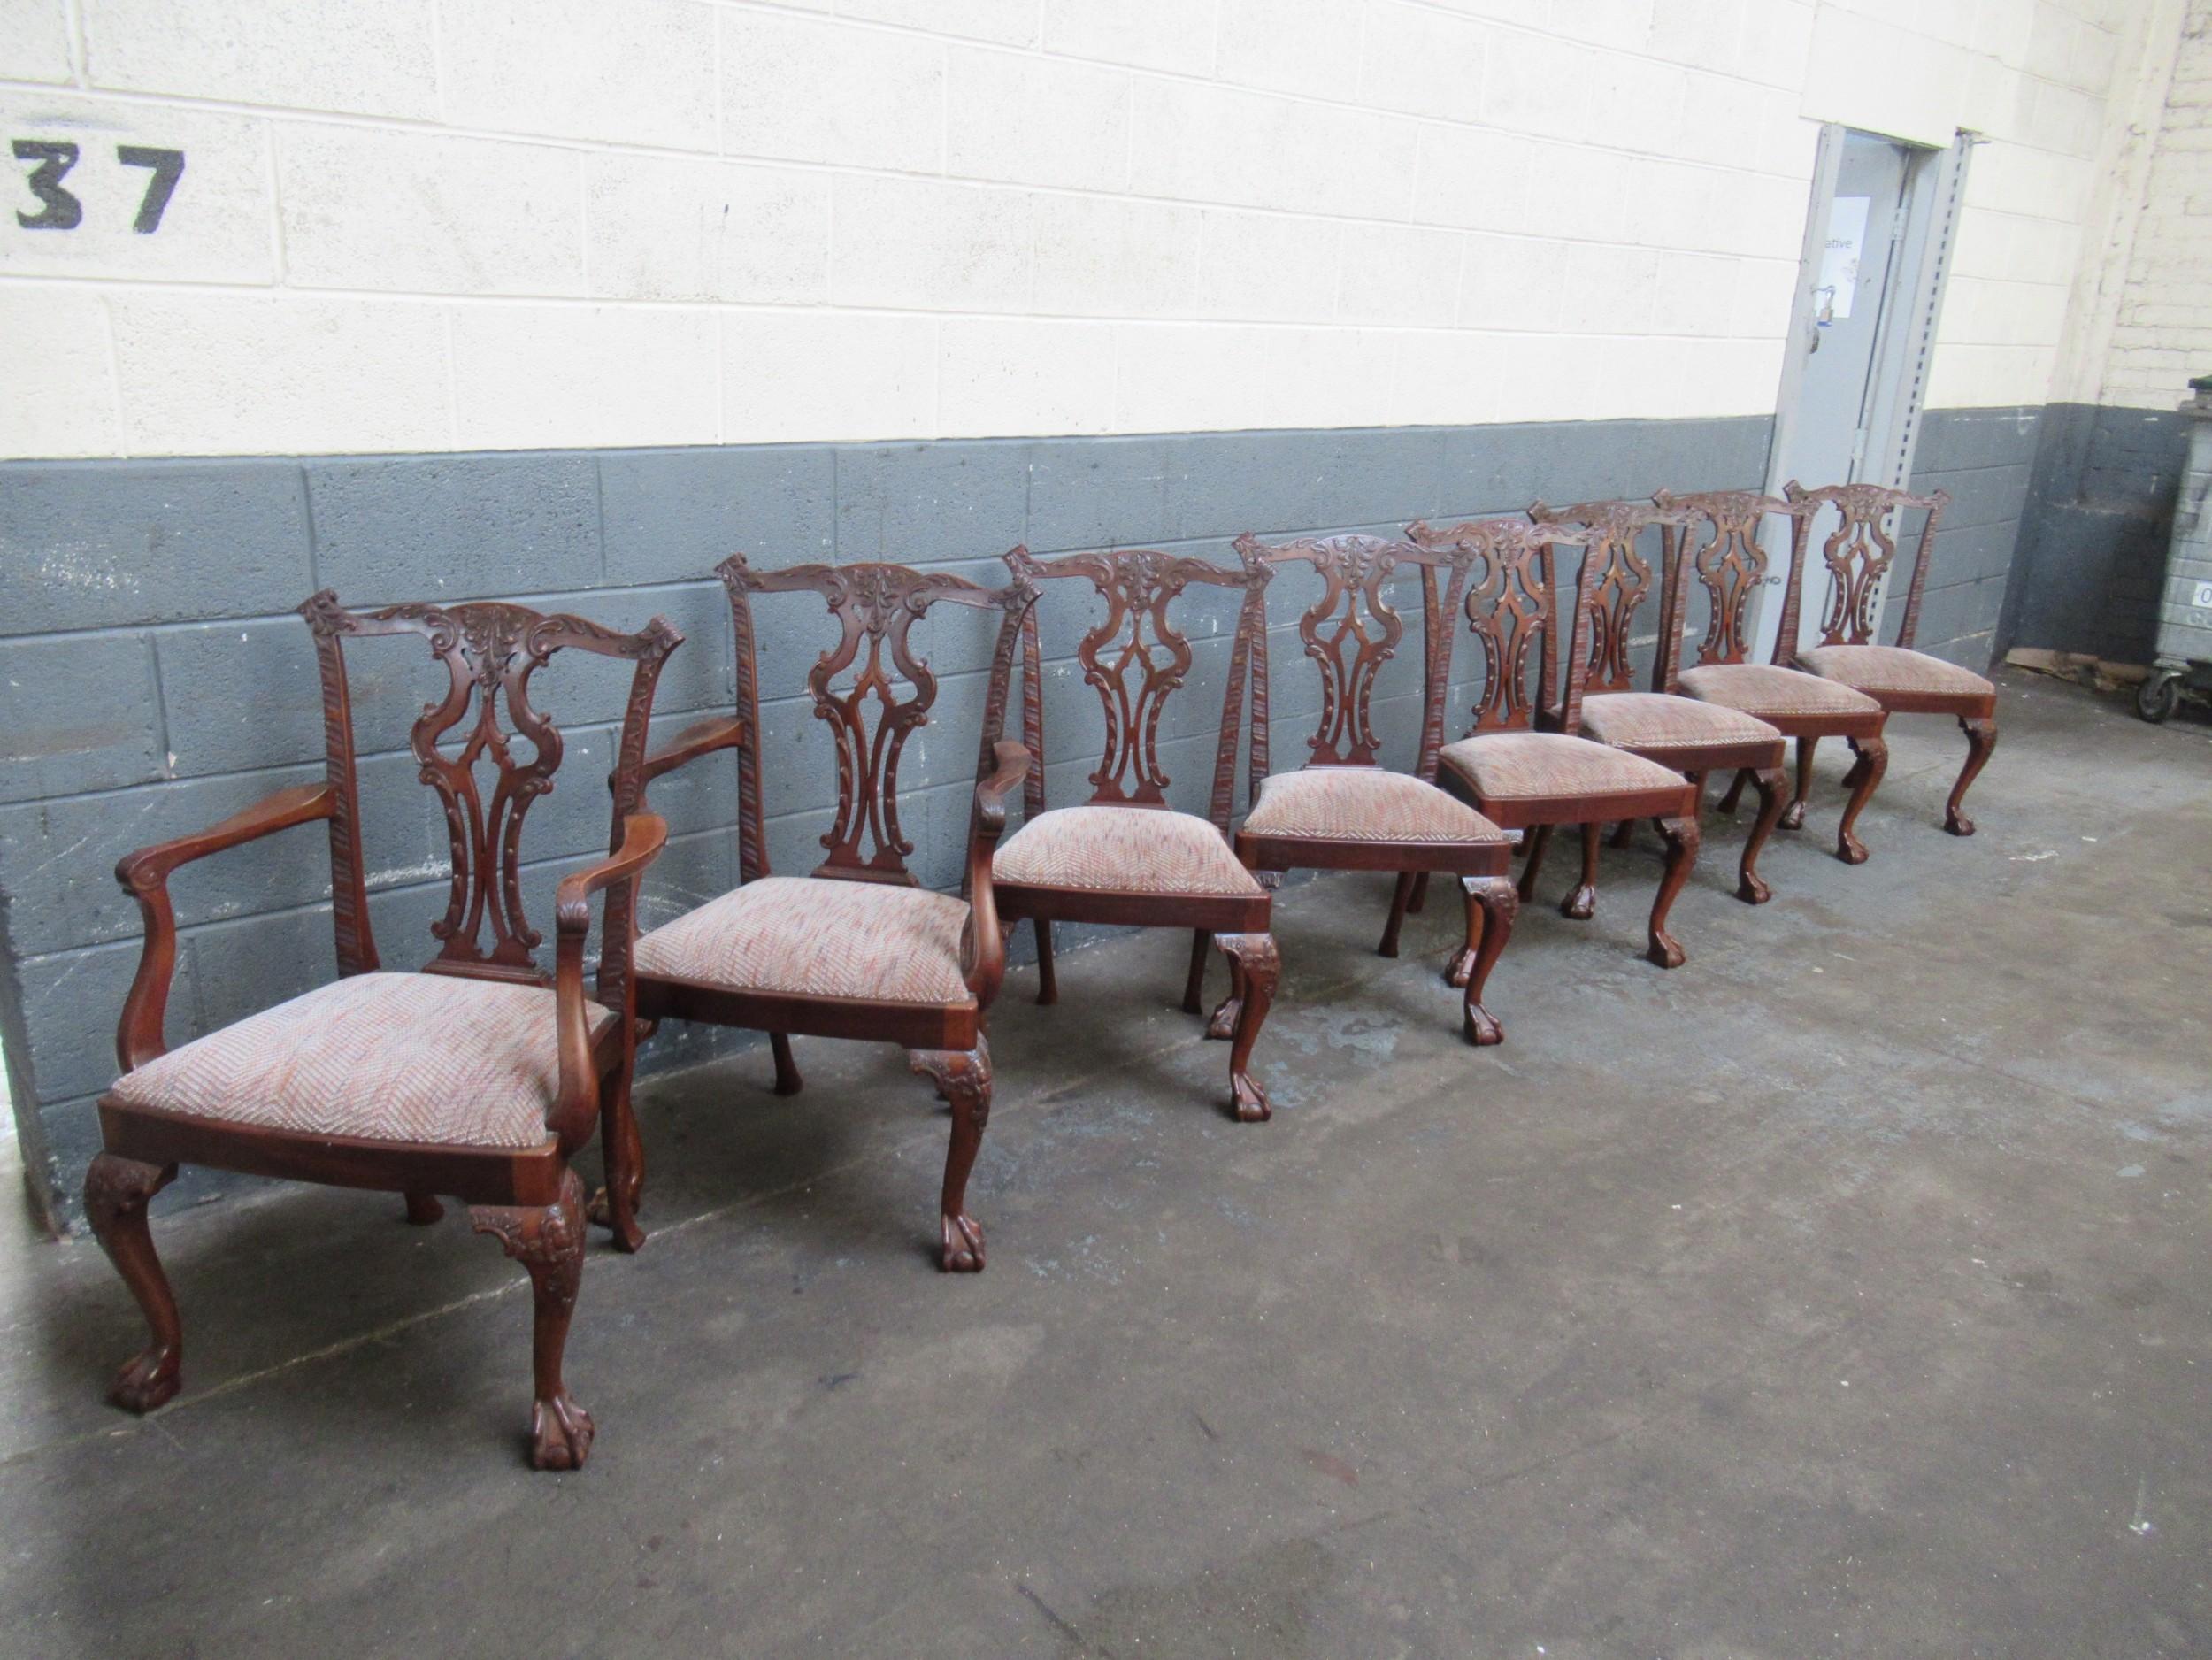 A superb Set of Eight (six side chairs and two armchairs or carvers) Antique English mid-19th century hand carved solid mahogany Chippendale style Dining Chairs.  The crestrail, back splat and stiles are extraordinarily and crisply hand-carved and